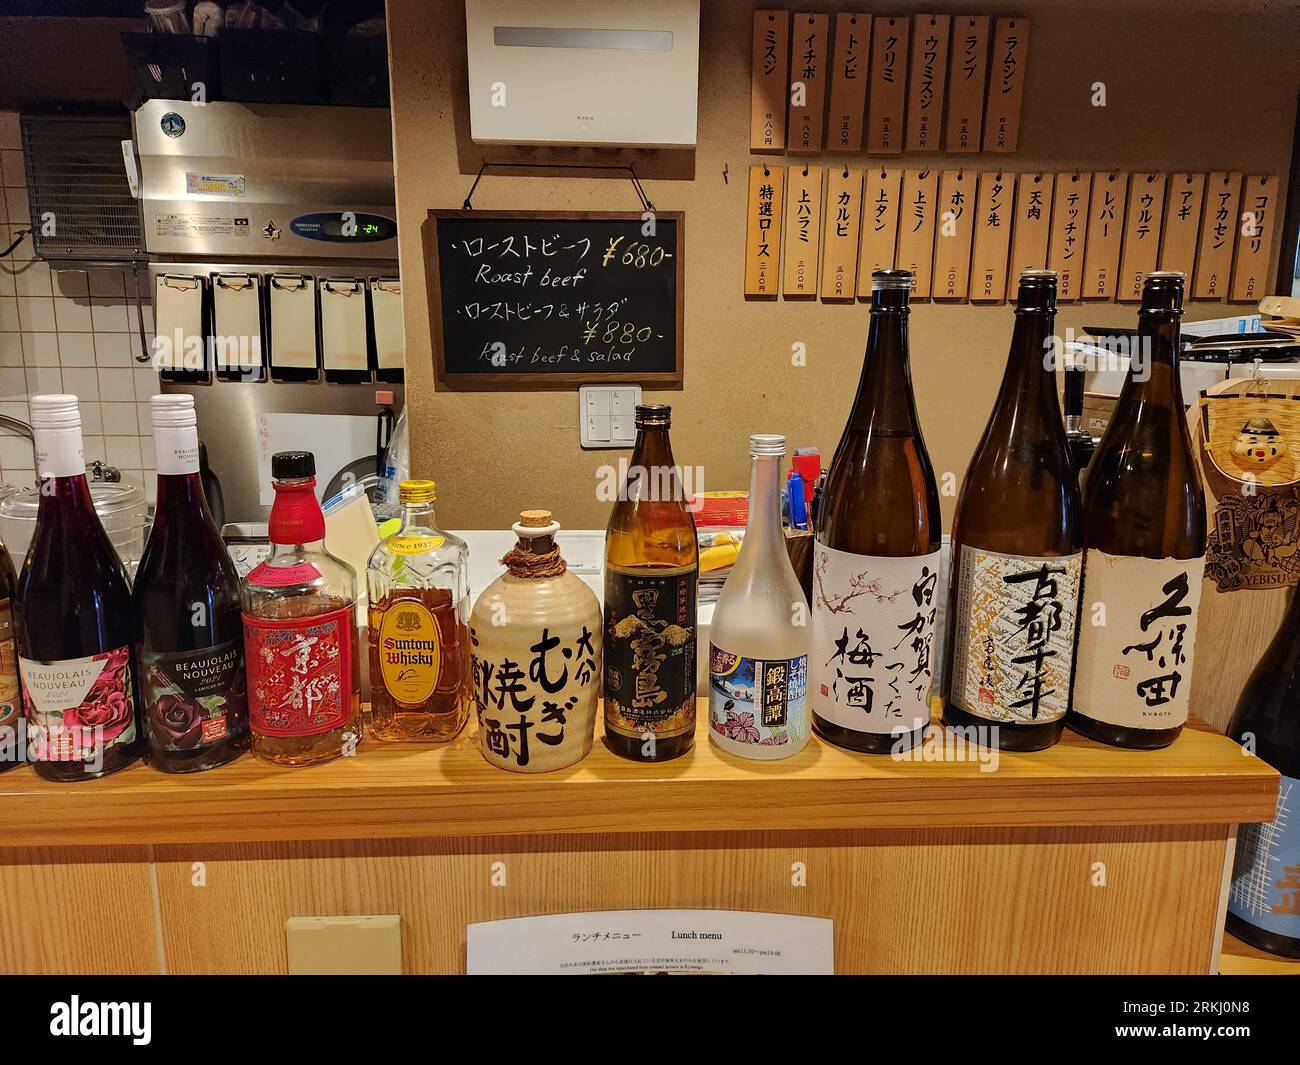 A Japanese Sake rice wine and other Japanese labeled bottles in a bar in Kyoto Stock Photo